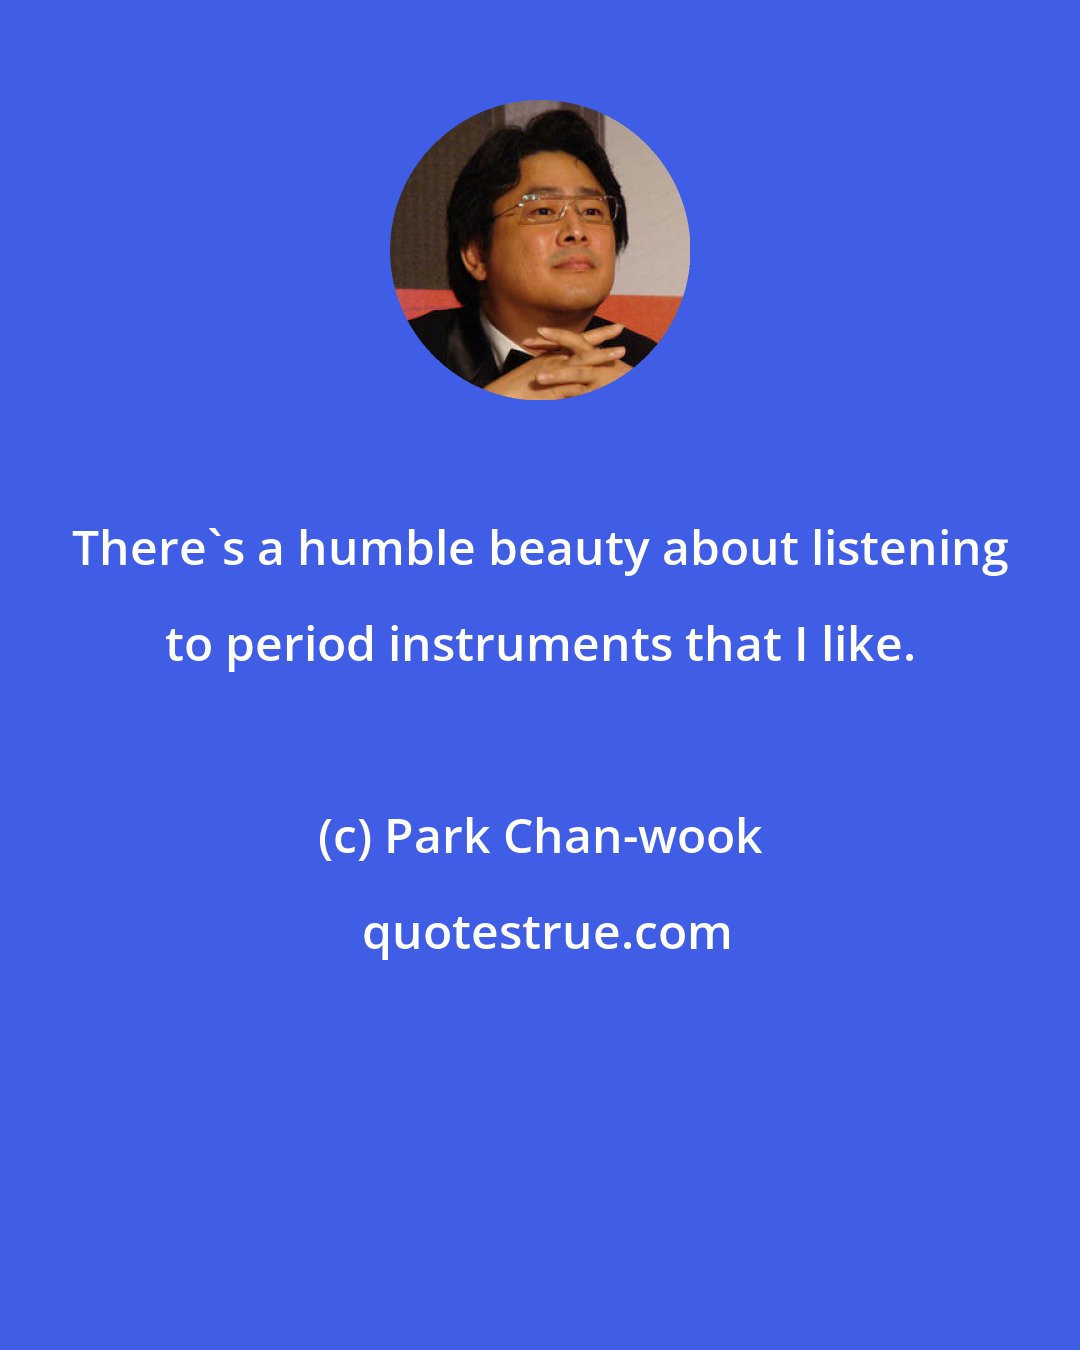 Park Chan-wook: There's a humble beauty about listening to period instruments that I like.